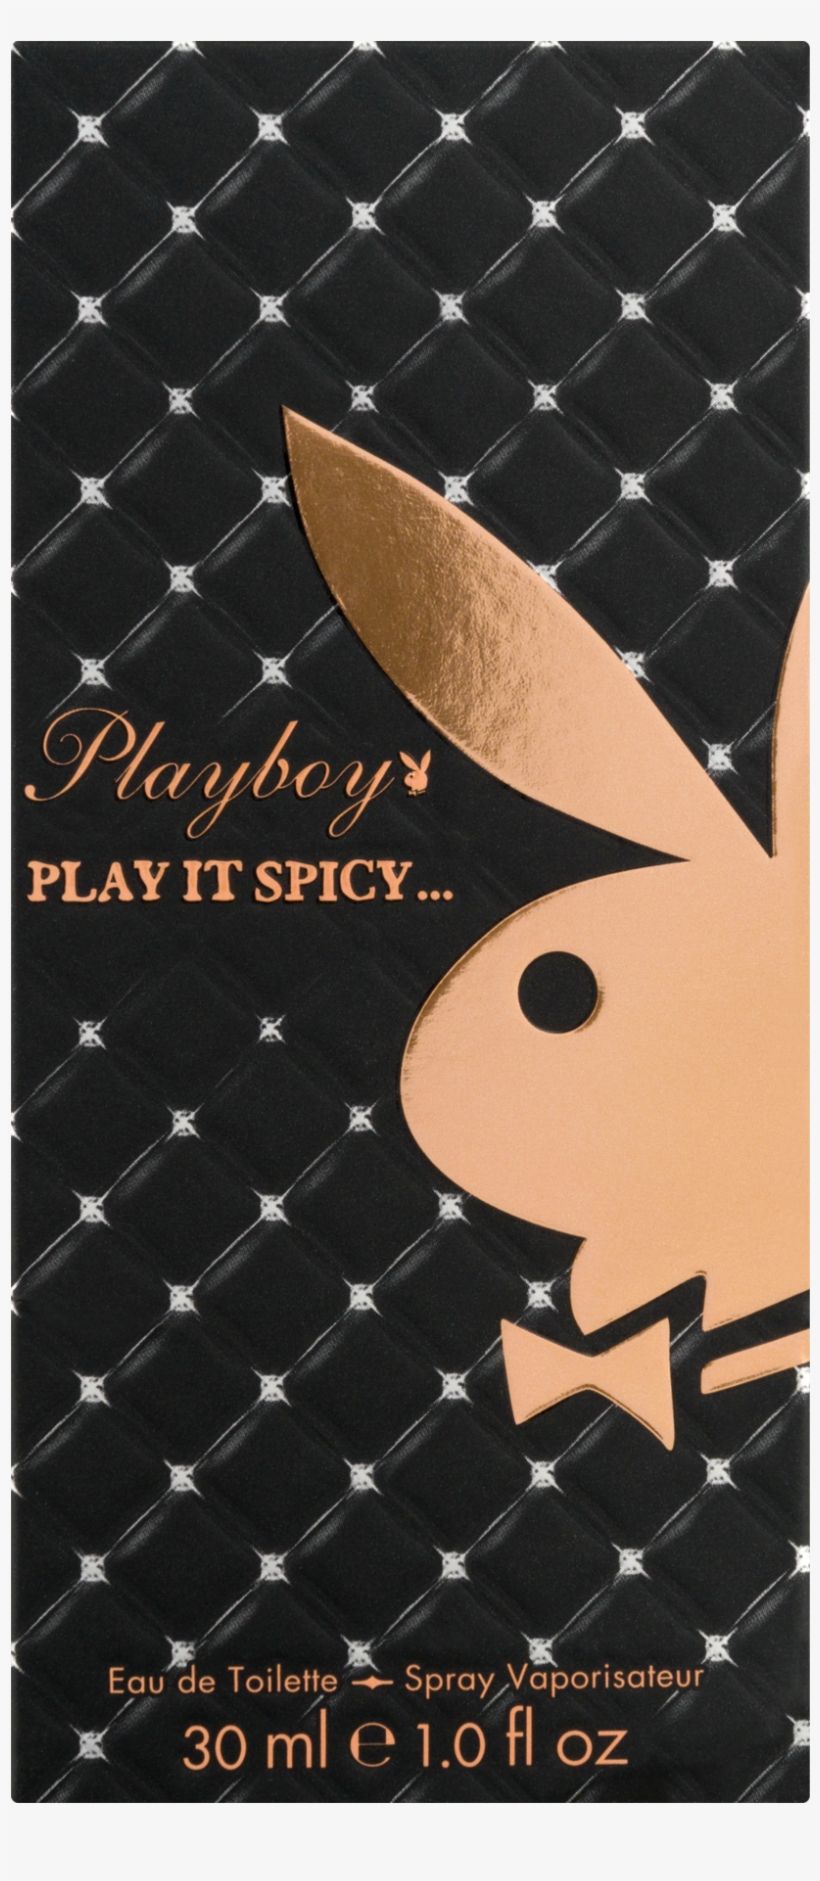 louis vuitton playboy bunny wallpapers iphone